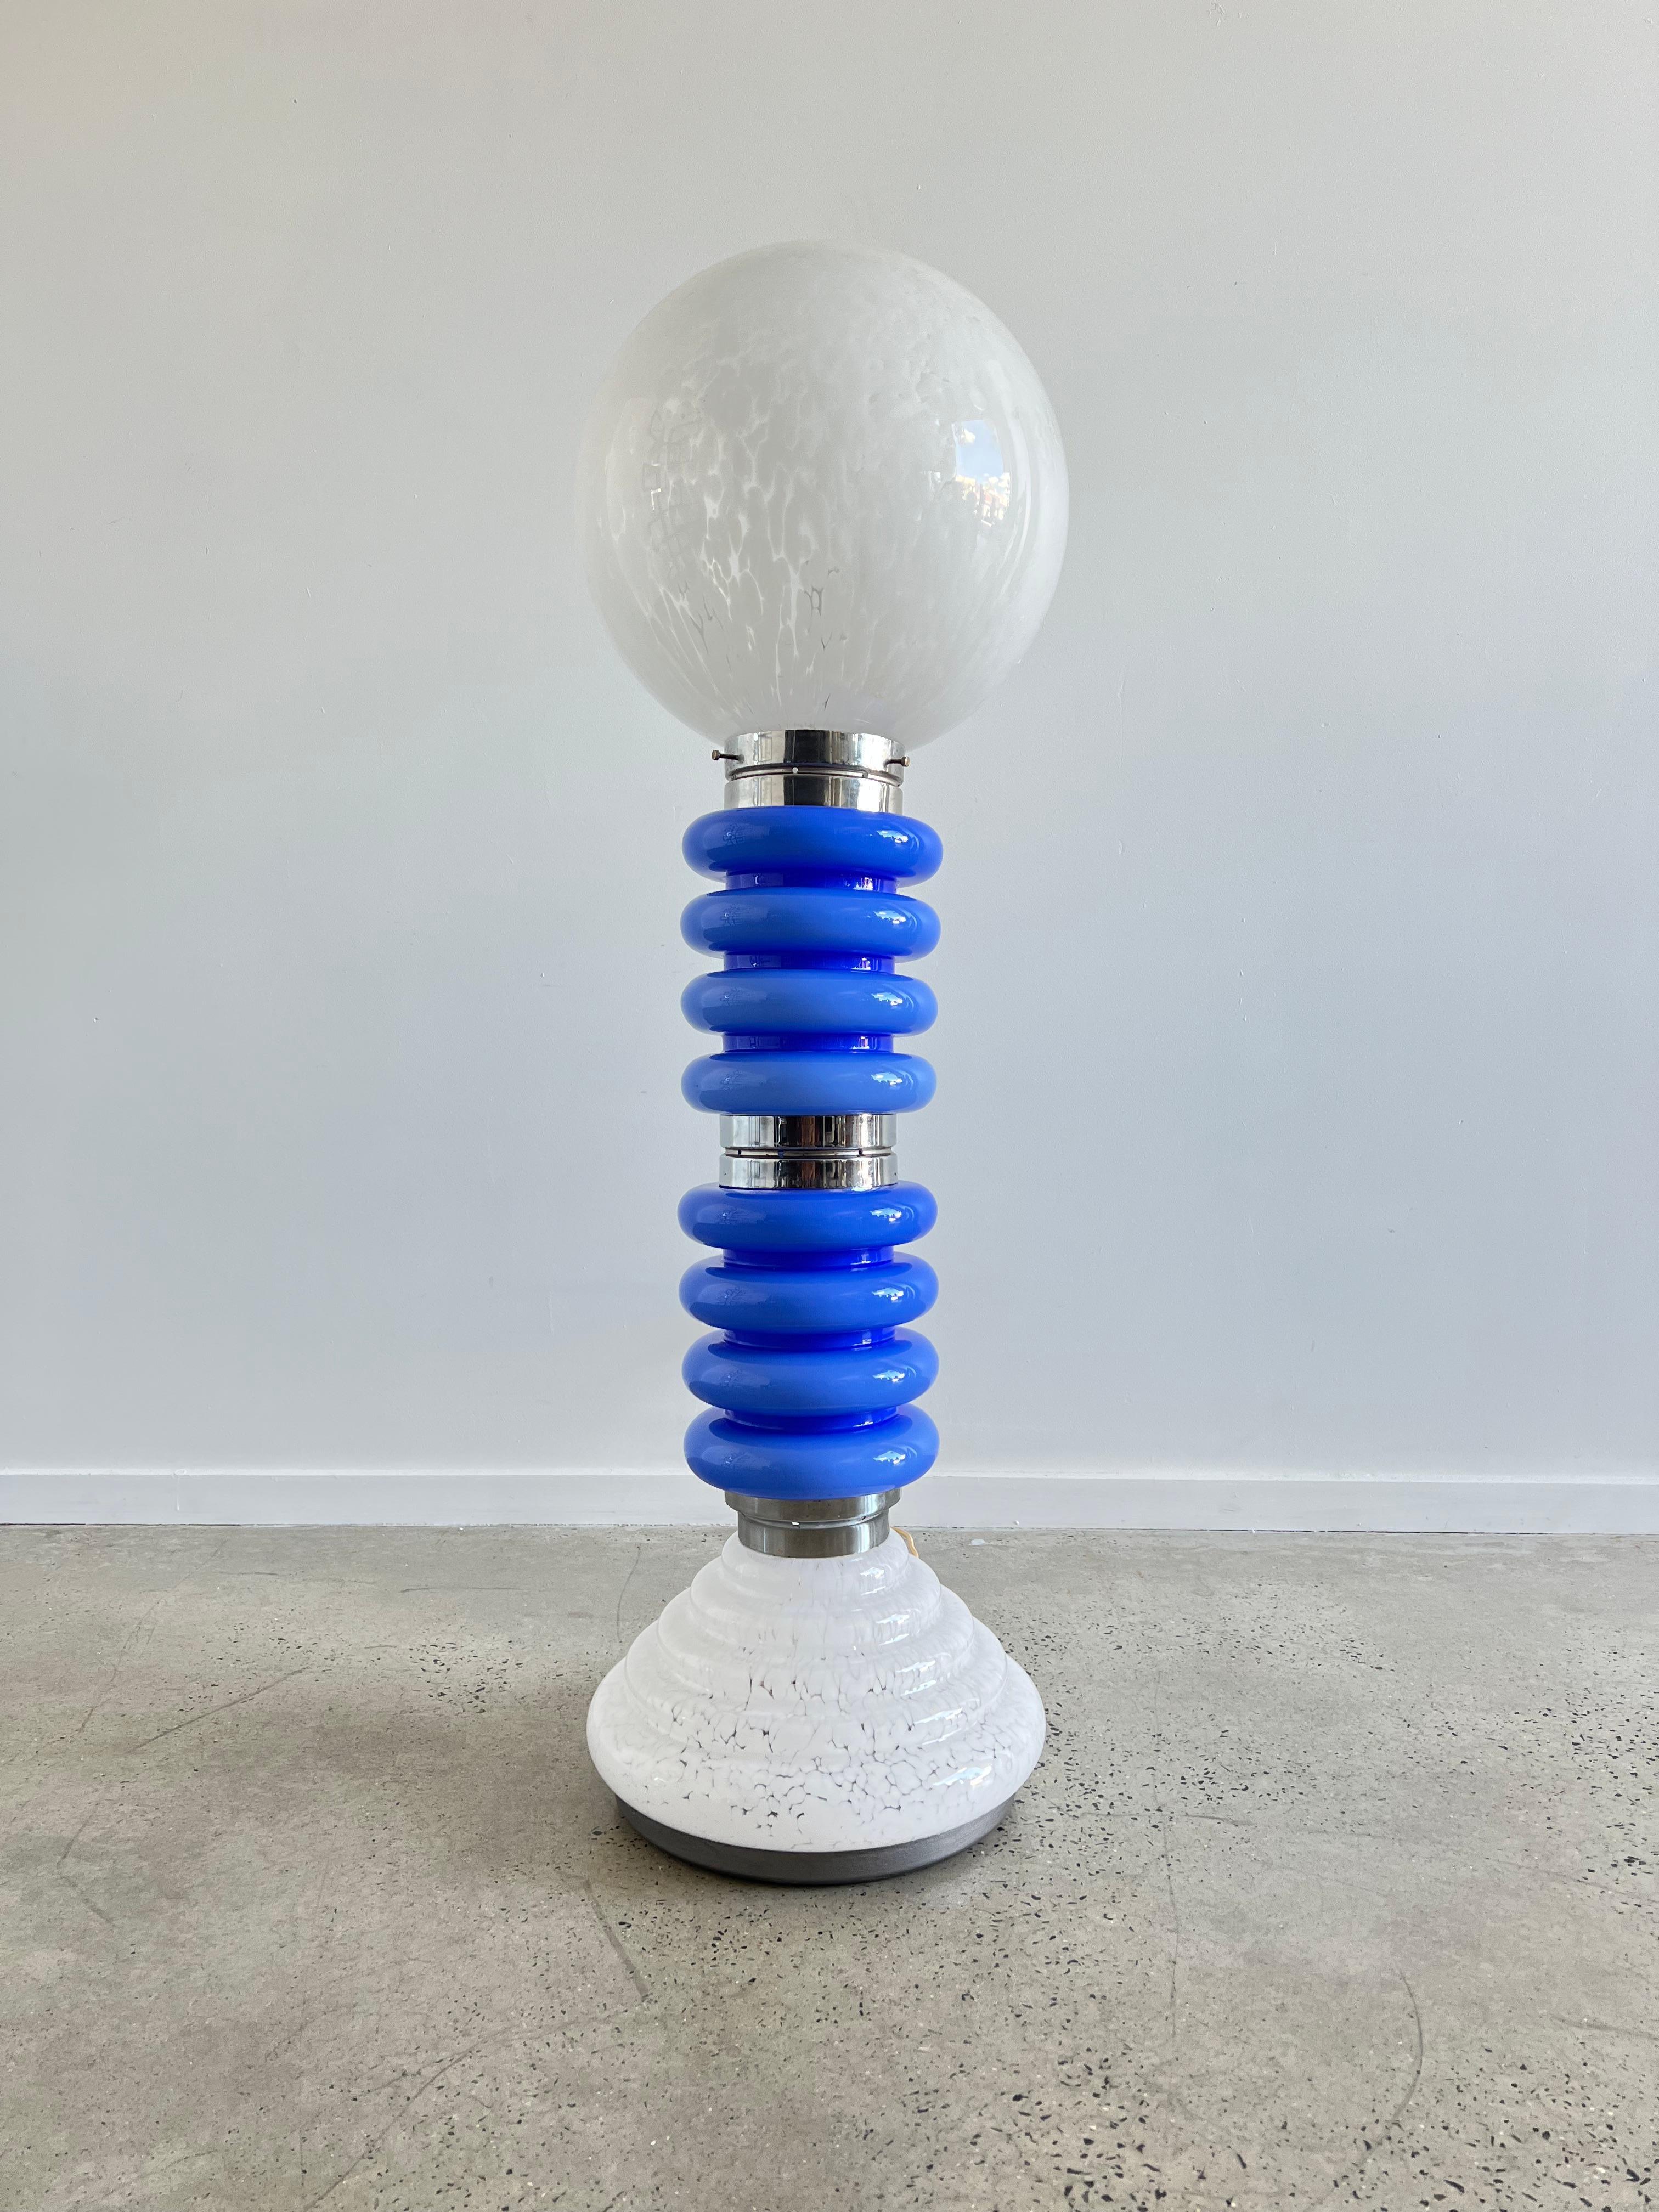 Timeless floor lamp by Carlo Nason for AV Mazzega.
Beautiful space age blue colour with a white Murano glass globe shade. The entire lamp is made out of glass with chromed center pieces.
The lamp works with two regular E26/E27 light bulbs. Good